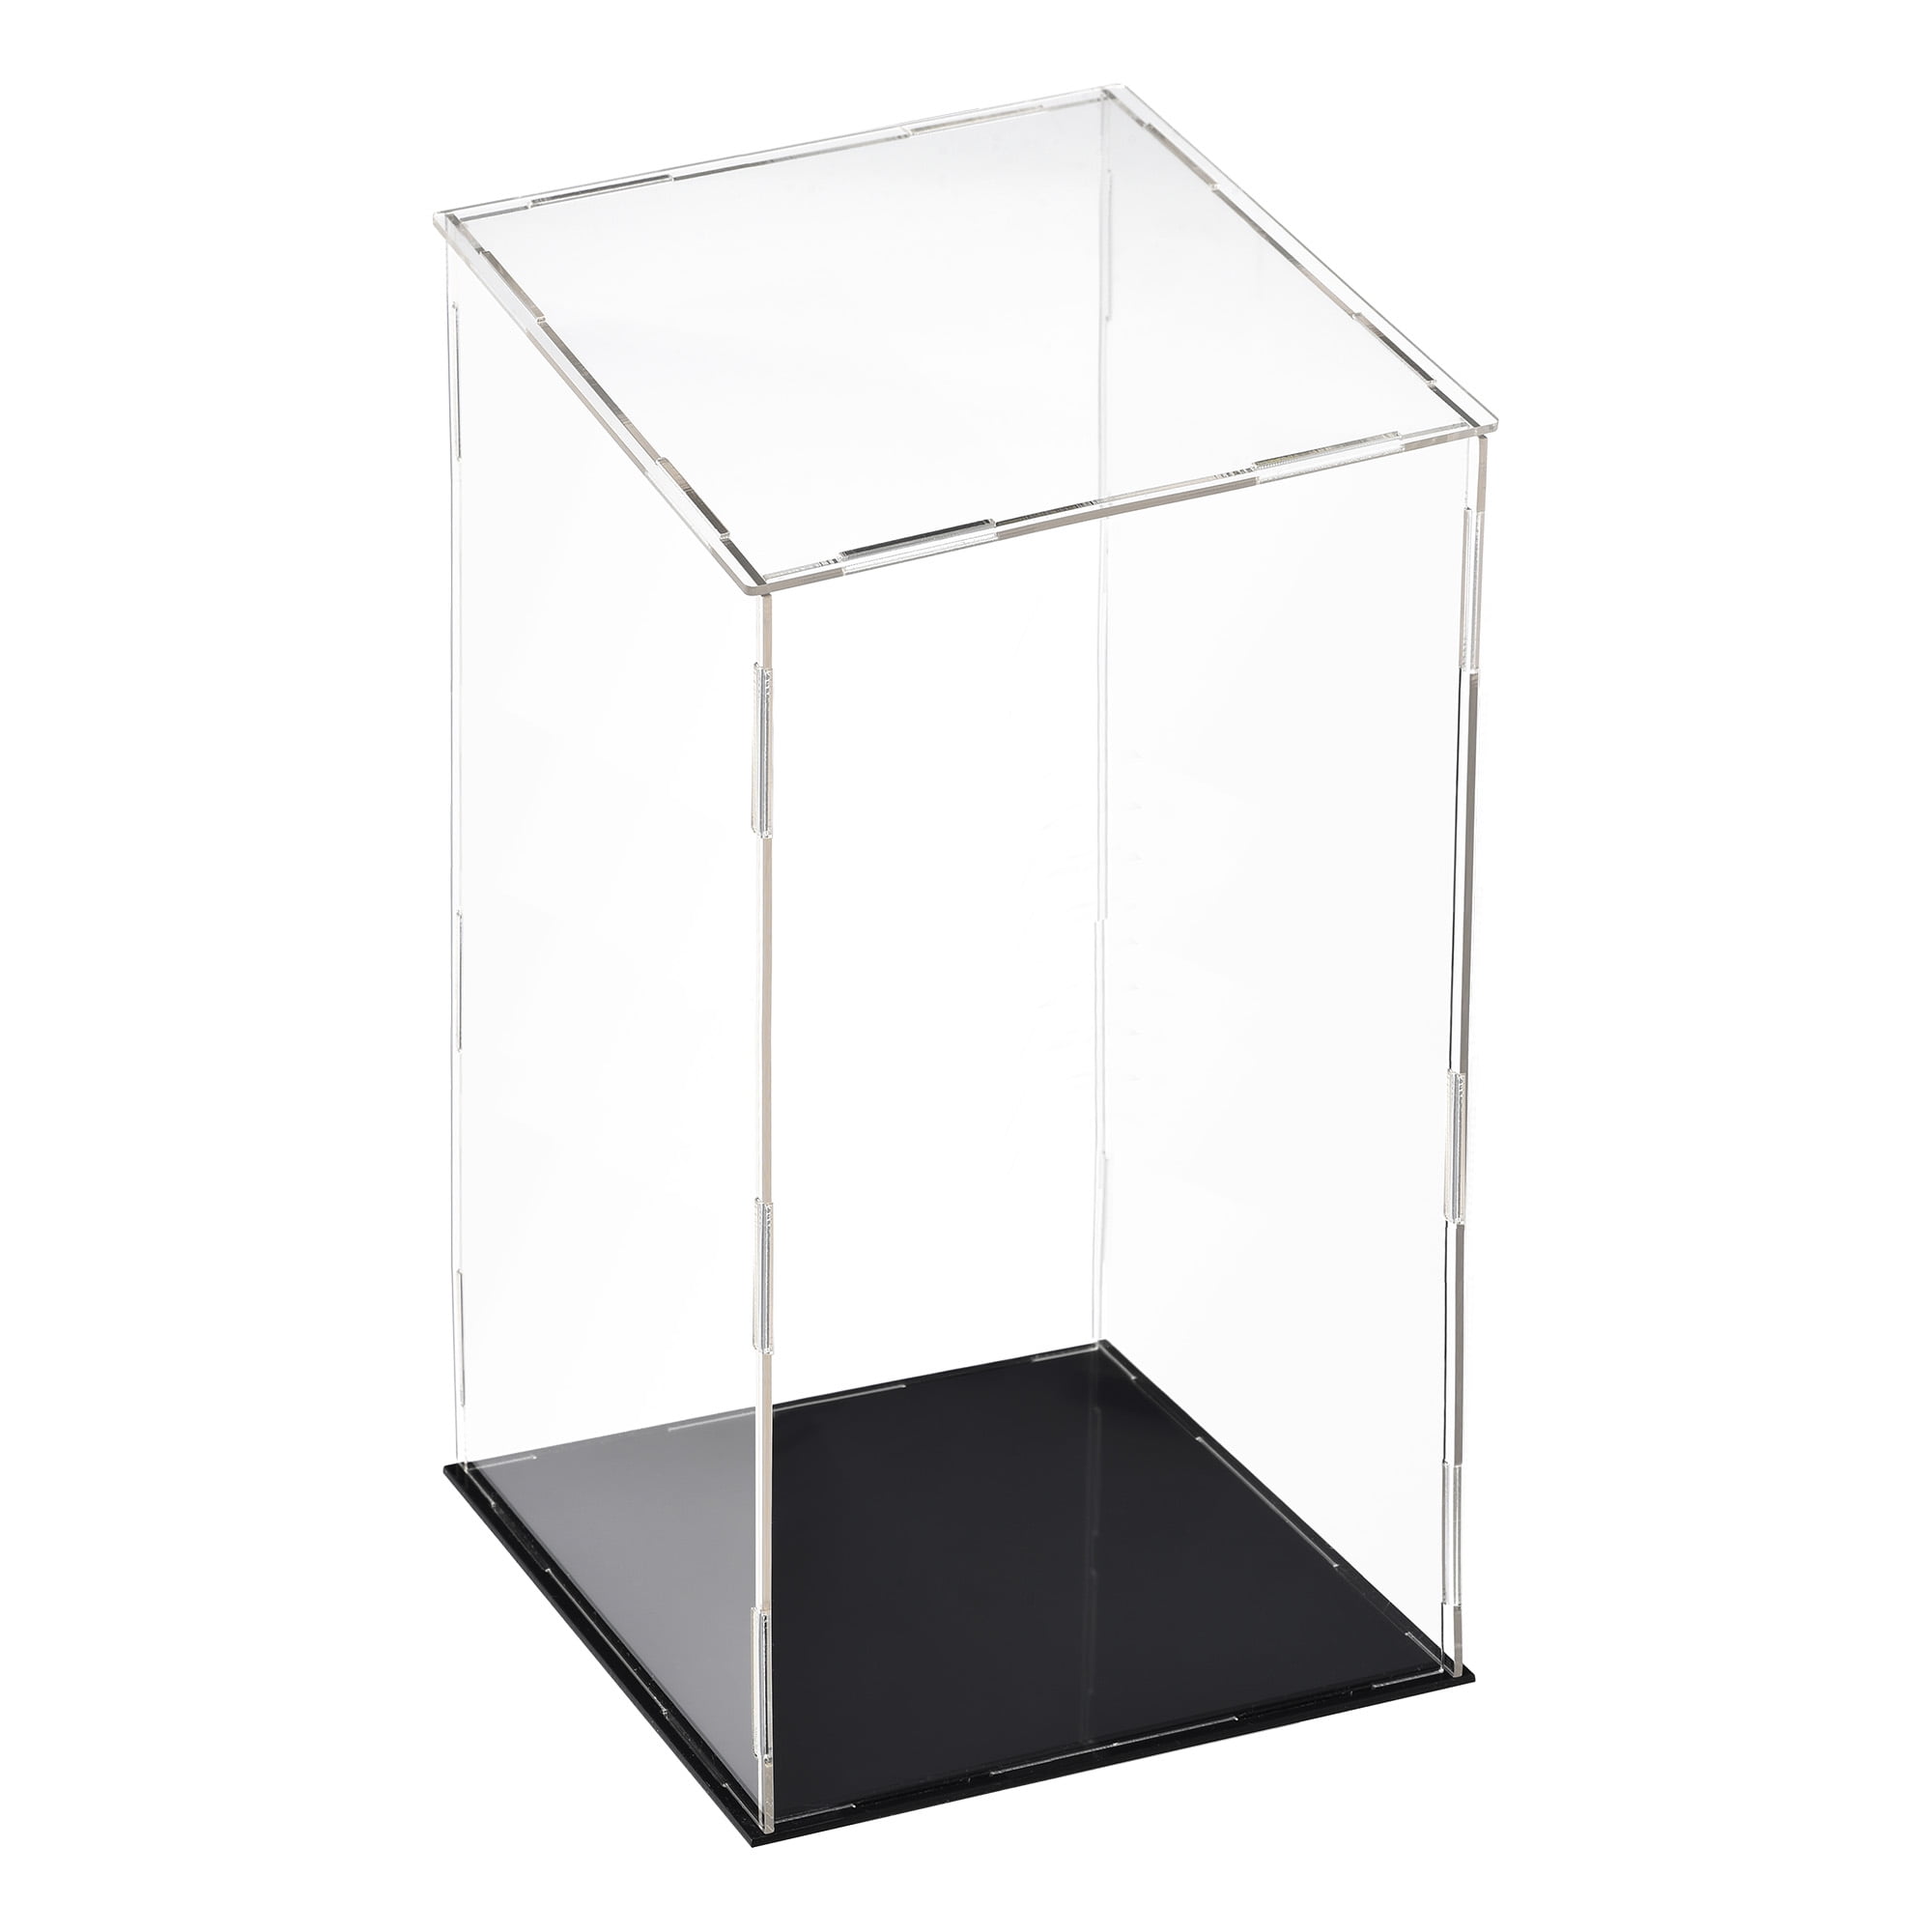 Uxcell Display Case Box Acrylic Box Transparent Dustproof Protection Showcase 41x31x36cm for Collectibles, Size: 41x31x36cm/16.1x12.2x14.1 inch, Blue